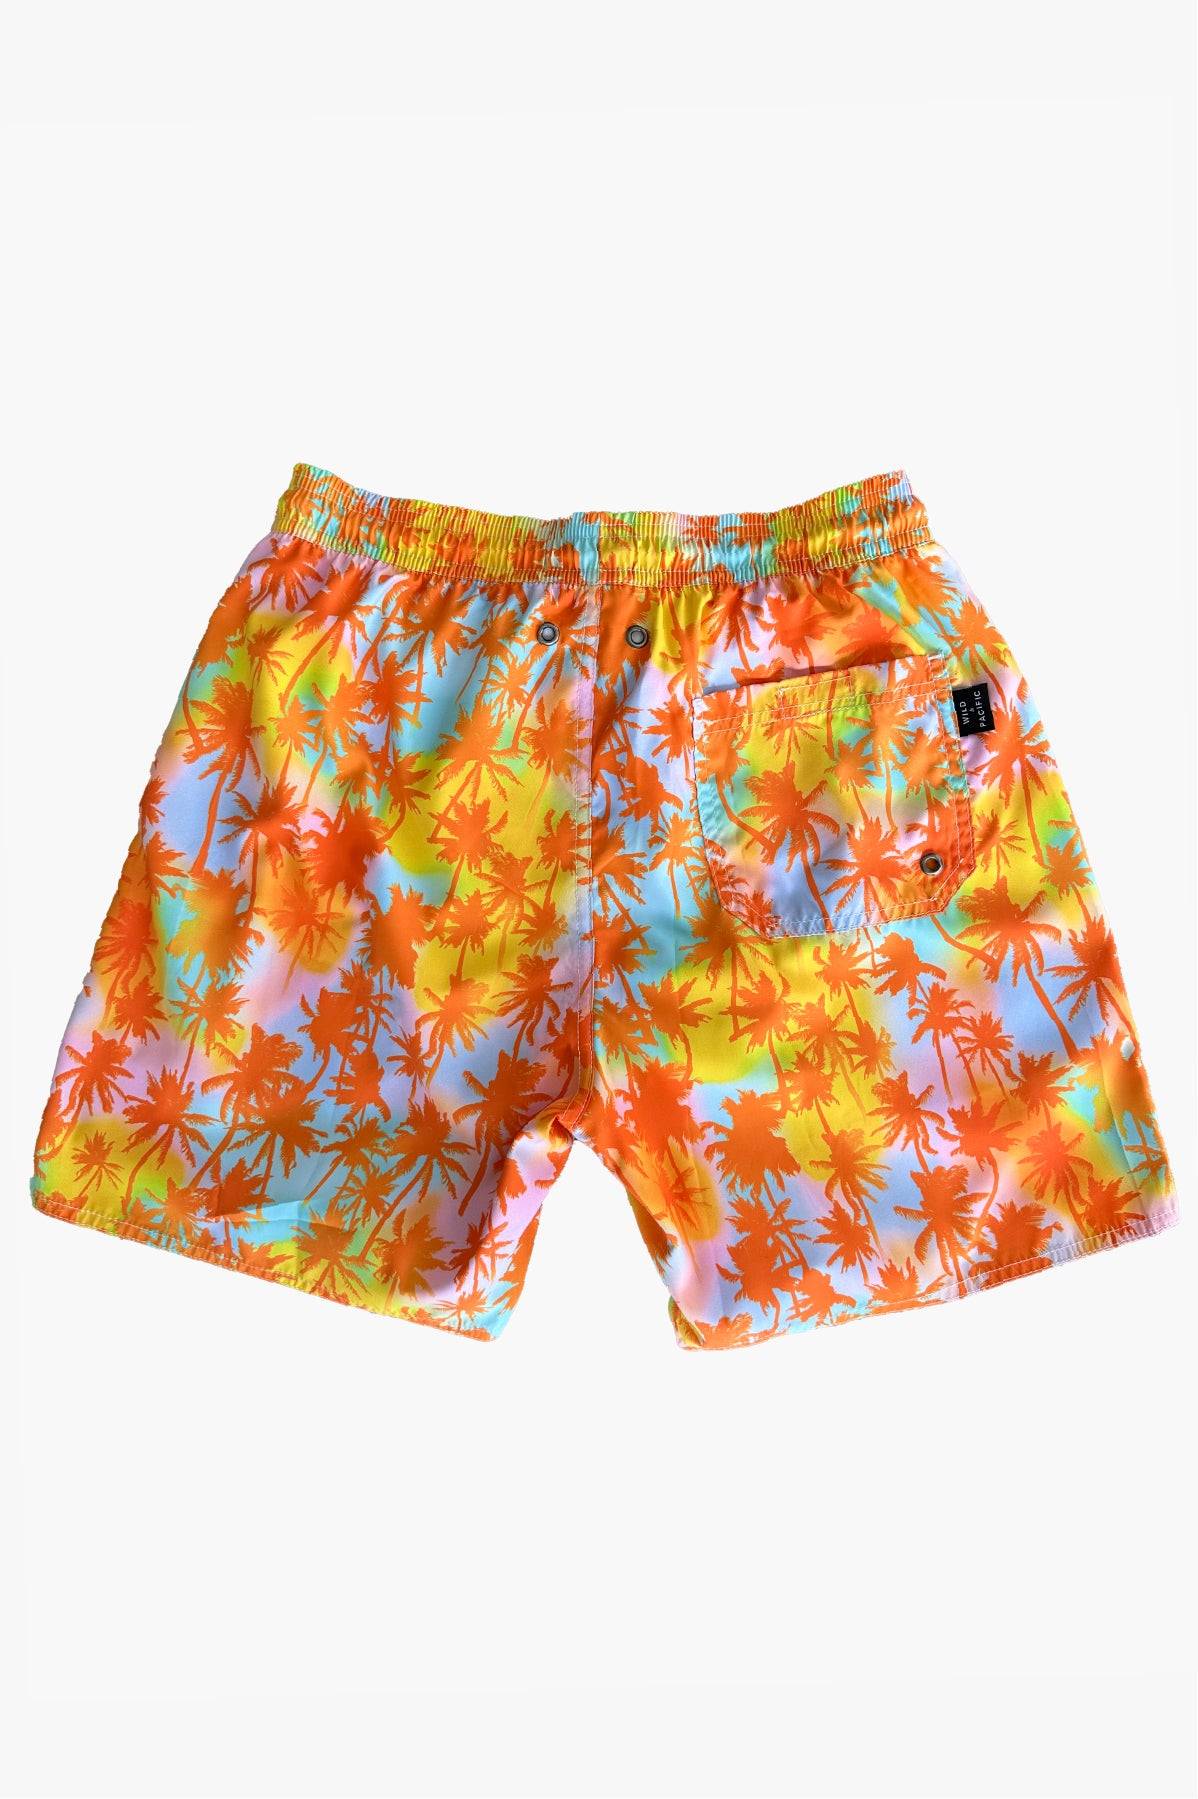 SOUTH BEACH - SWIMSHORT - Wild & Pacific Colombia